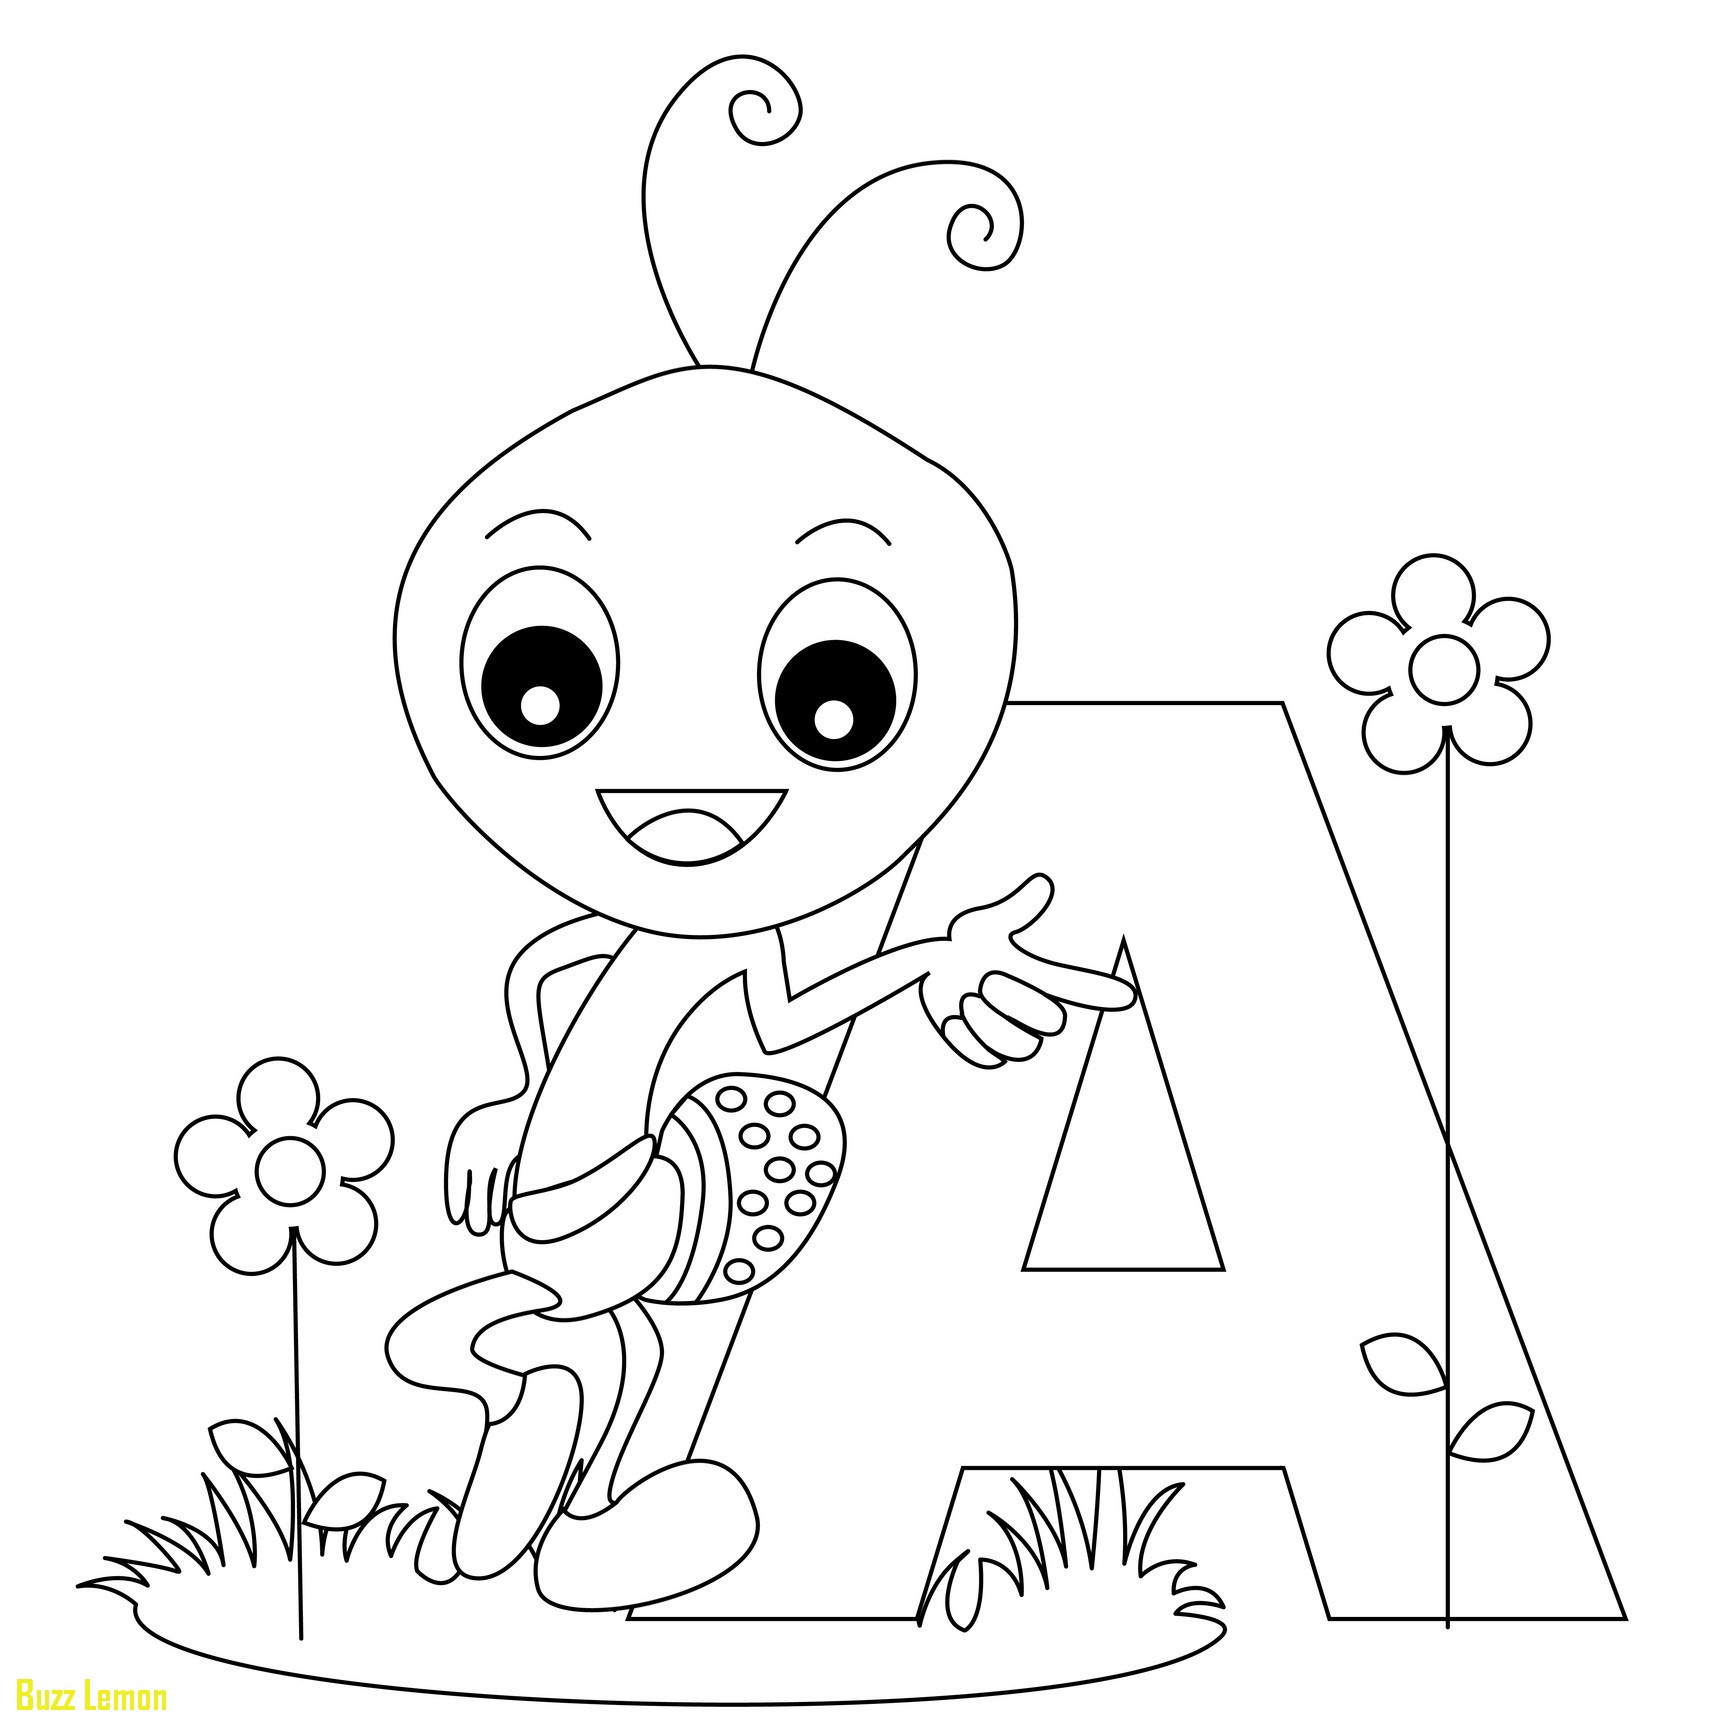 coloring-pages-worksheets-at-getcolorings-free-printable